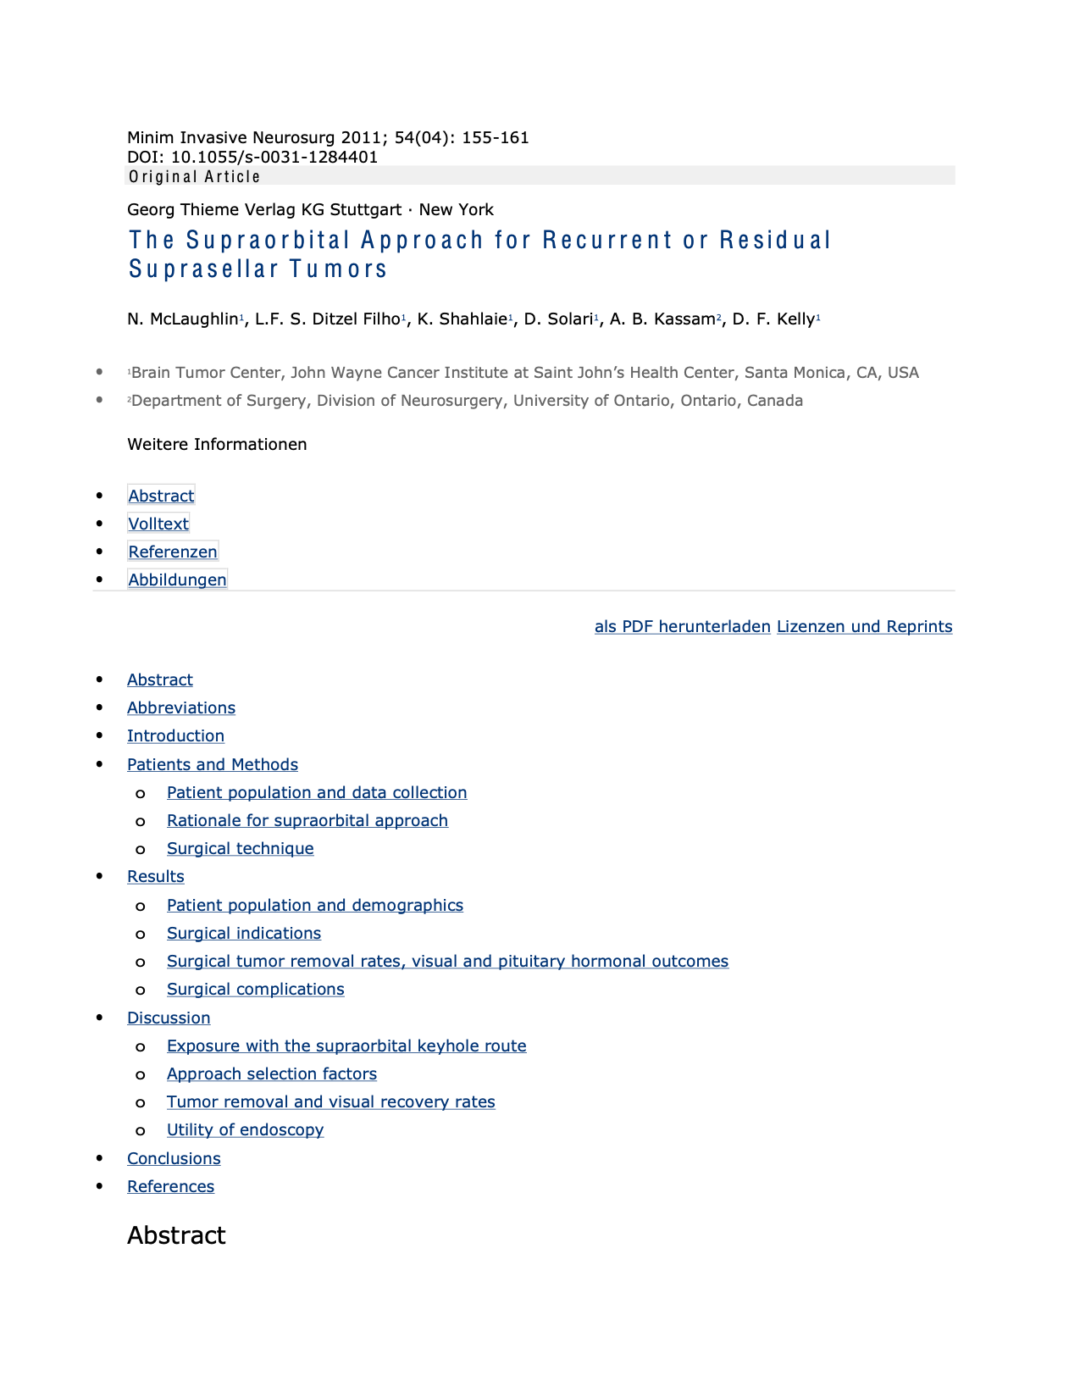 The Supraorbital Approach for Recurrent or Residual Suprasellar Tumors